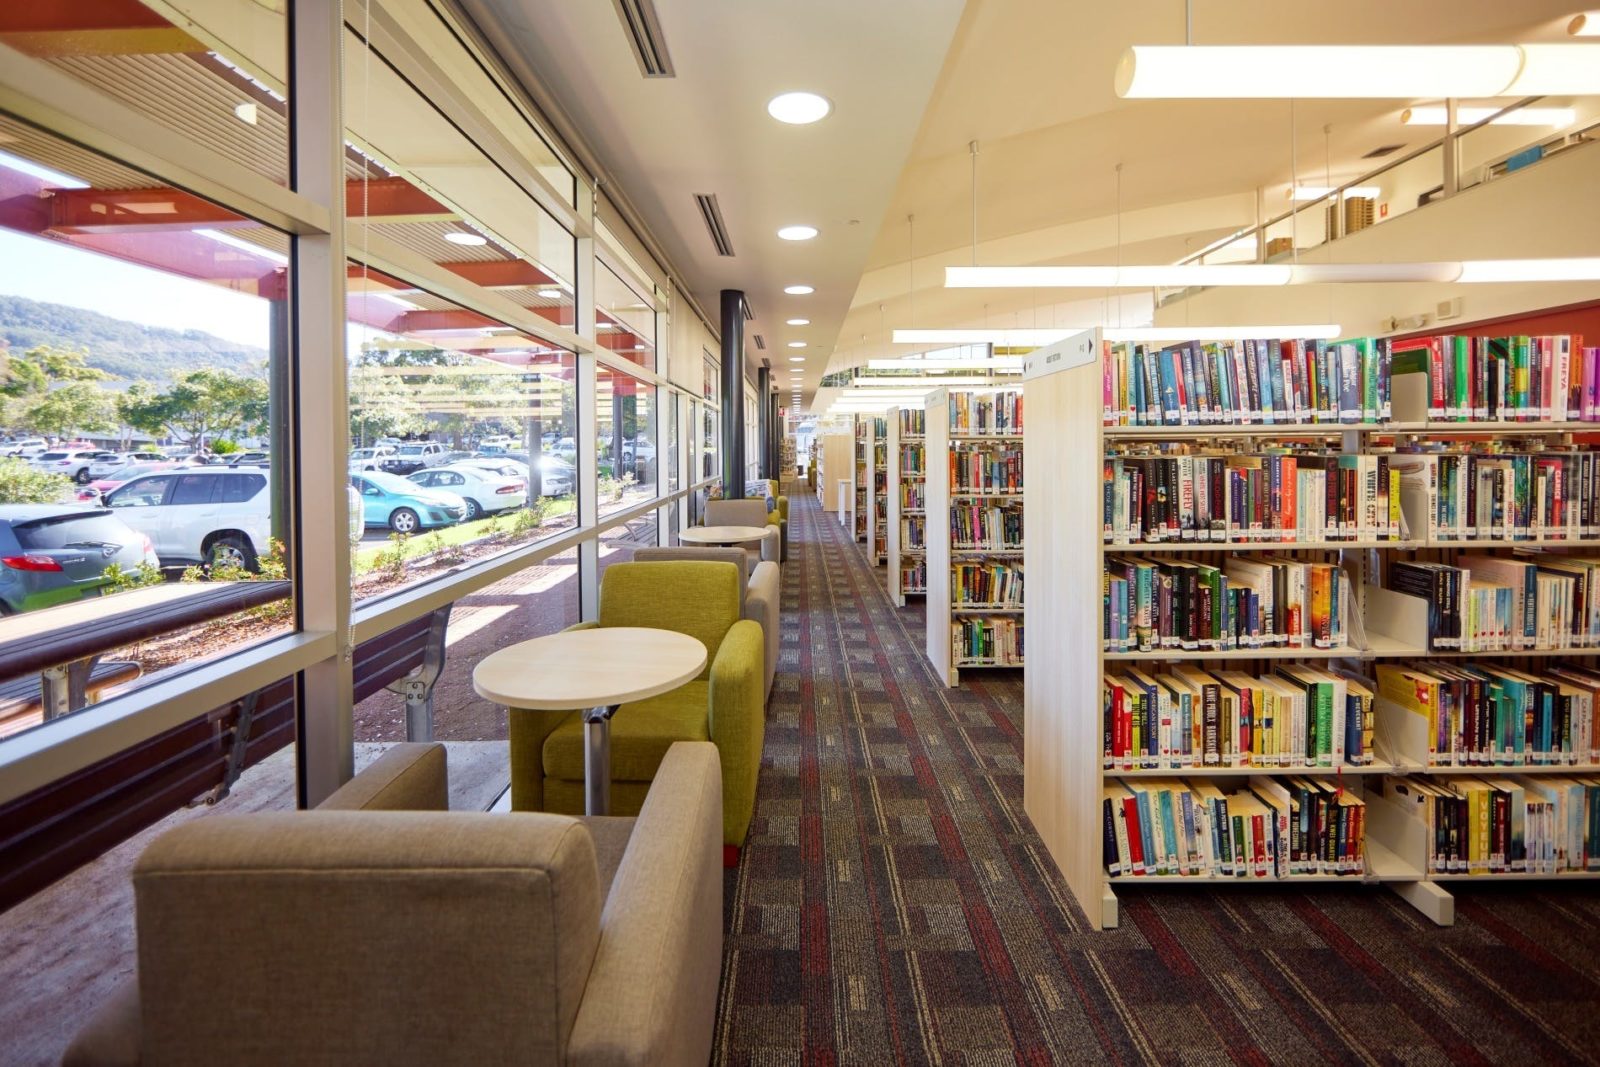 Comfortable lounge chairs and small tables adjacent to large windows and book shelves.